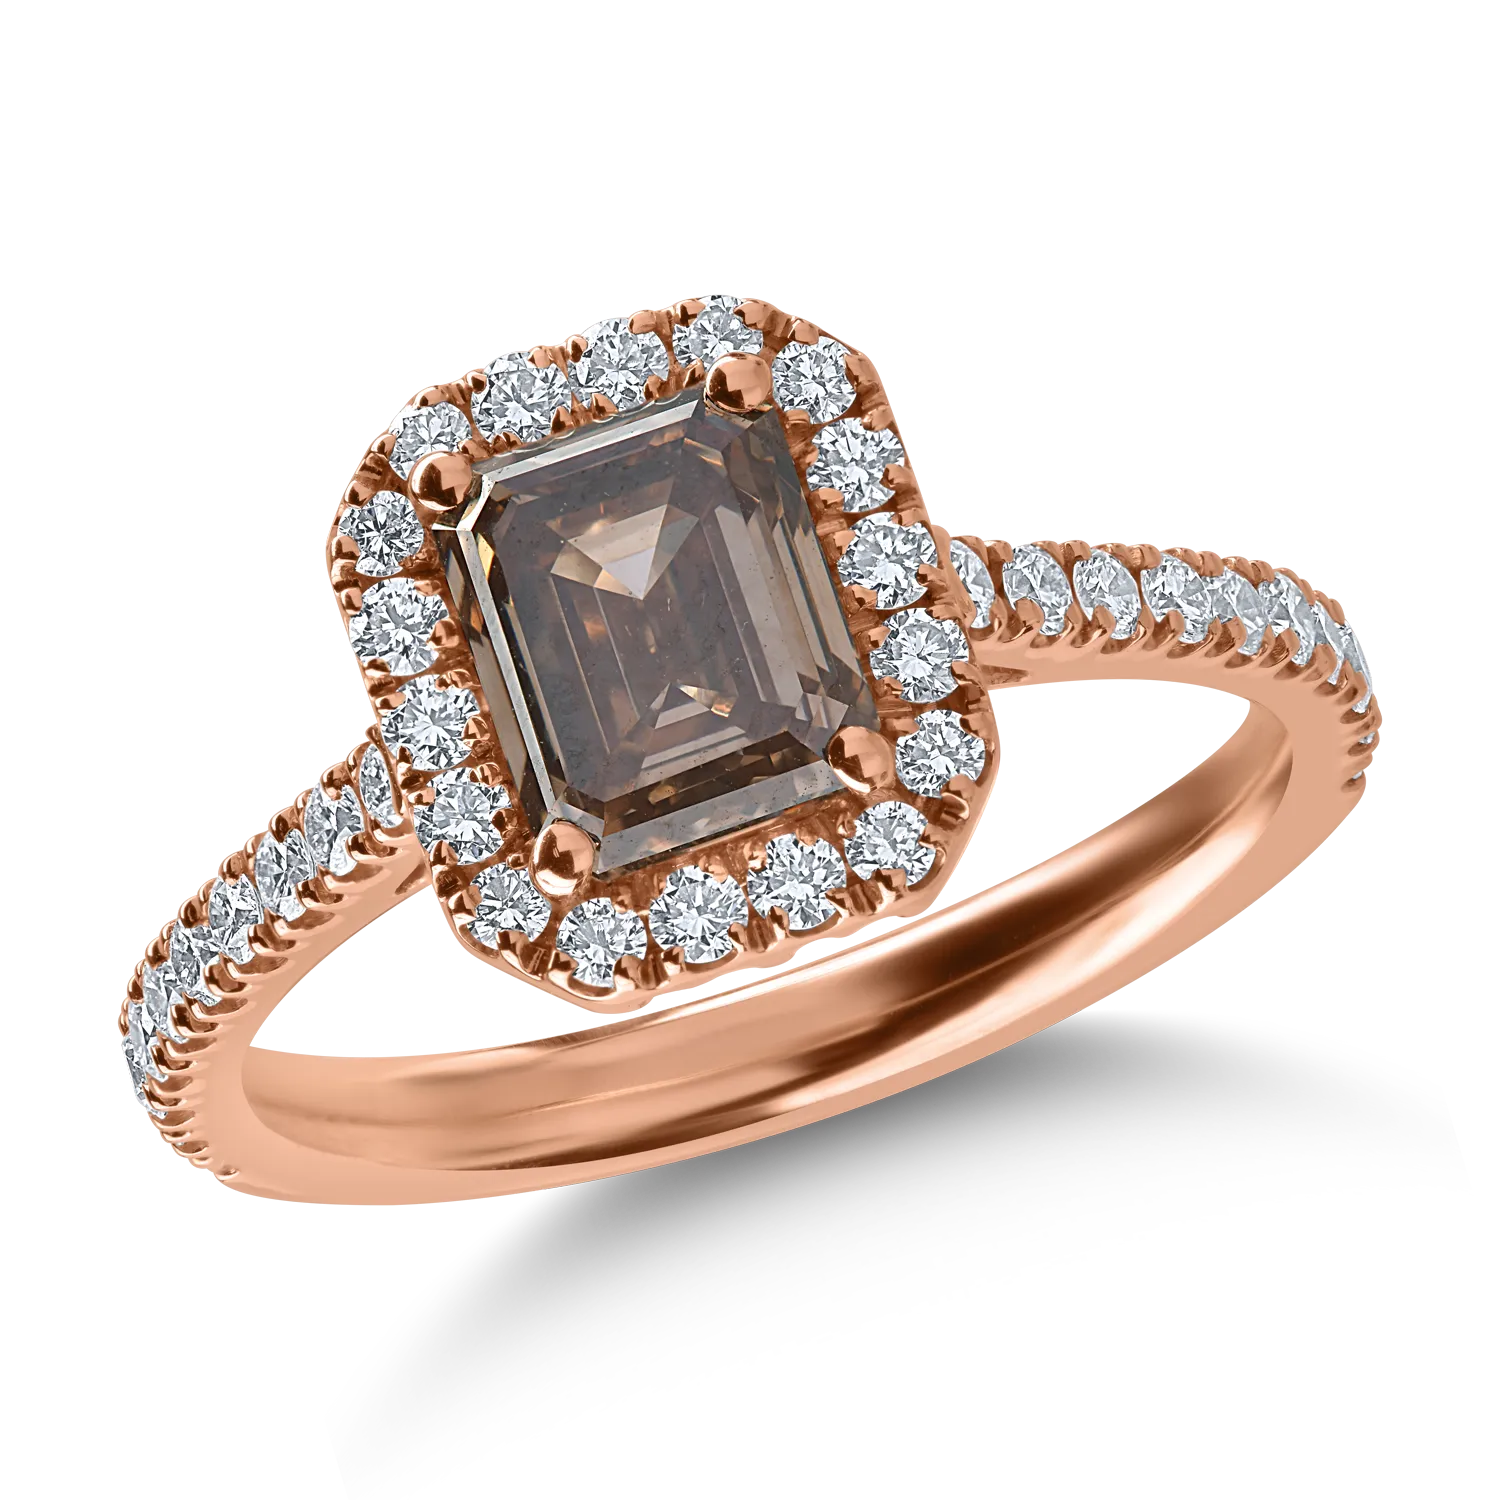 Rose gold ring with 1.52ct brown diamond and 0.54ct clear diamonds